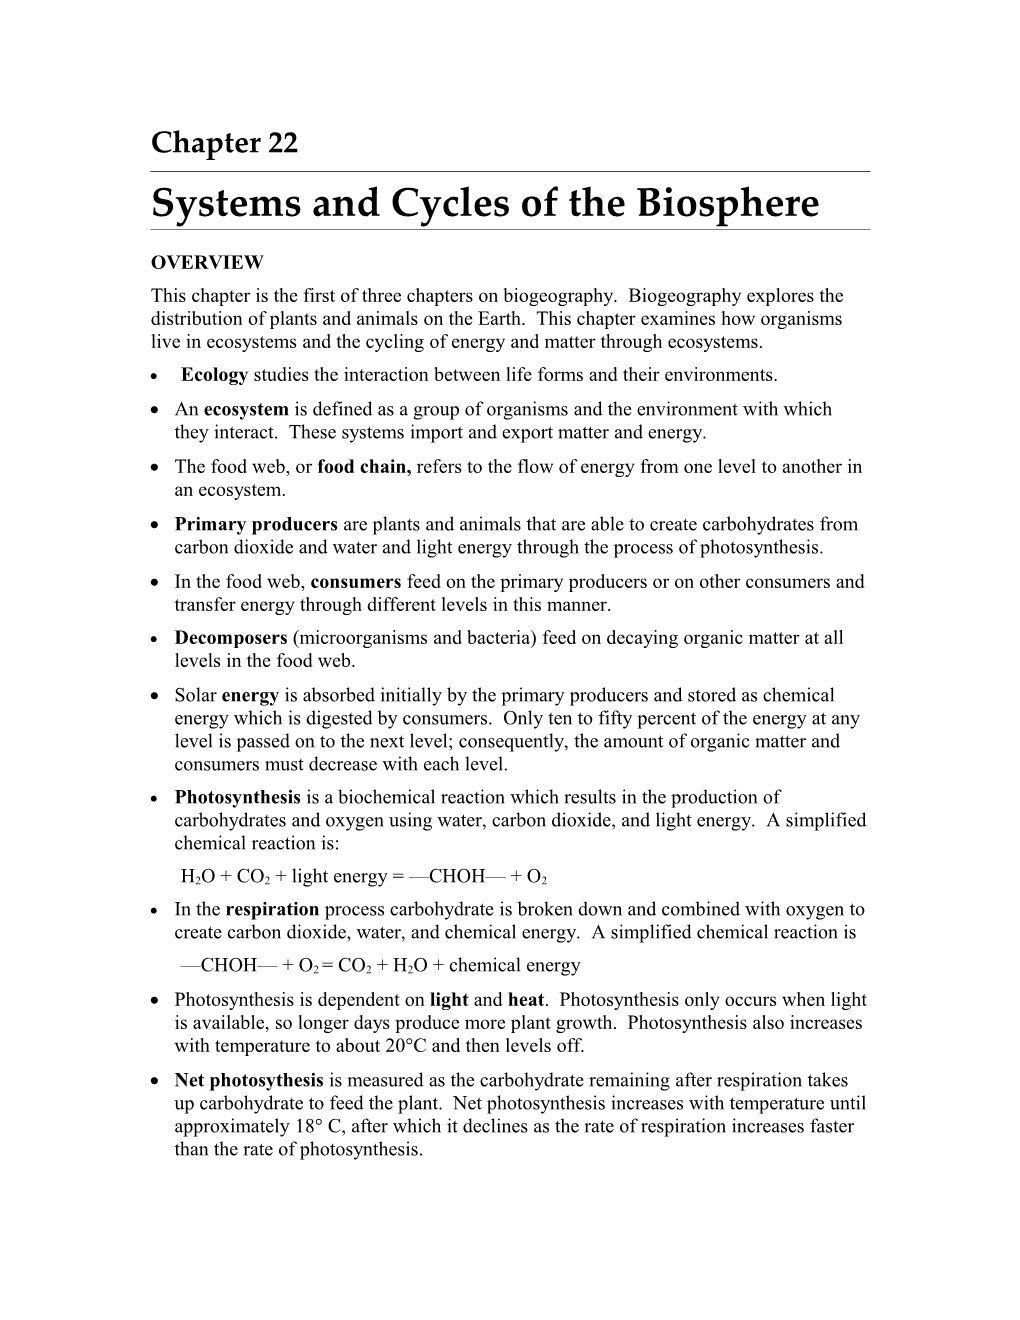 Systems and Cycles of the Biosphere